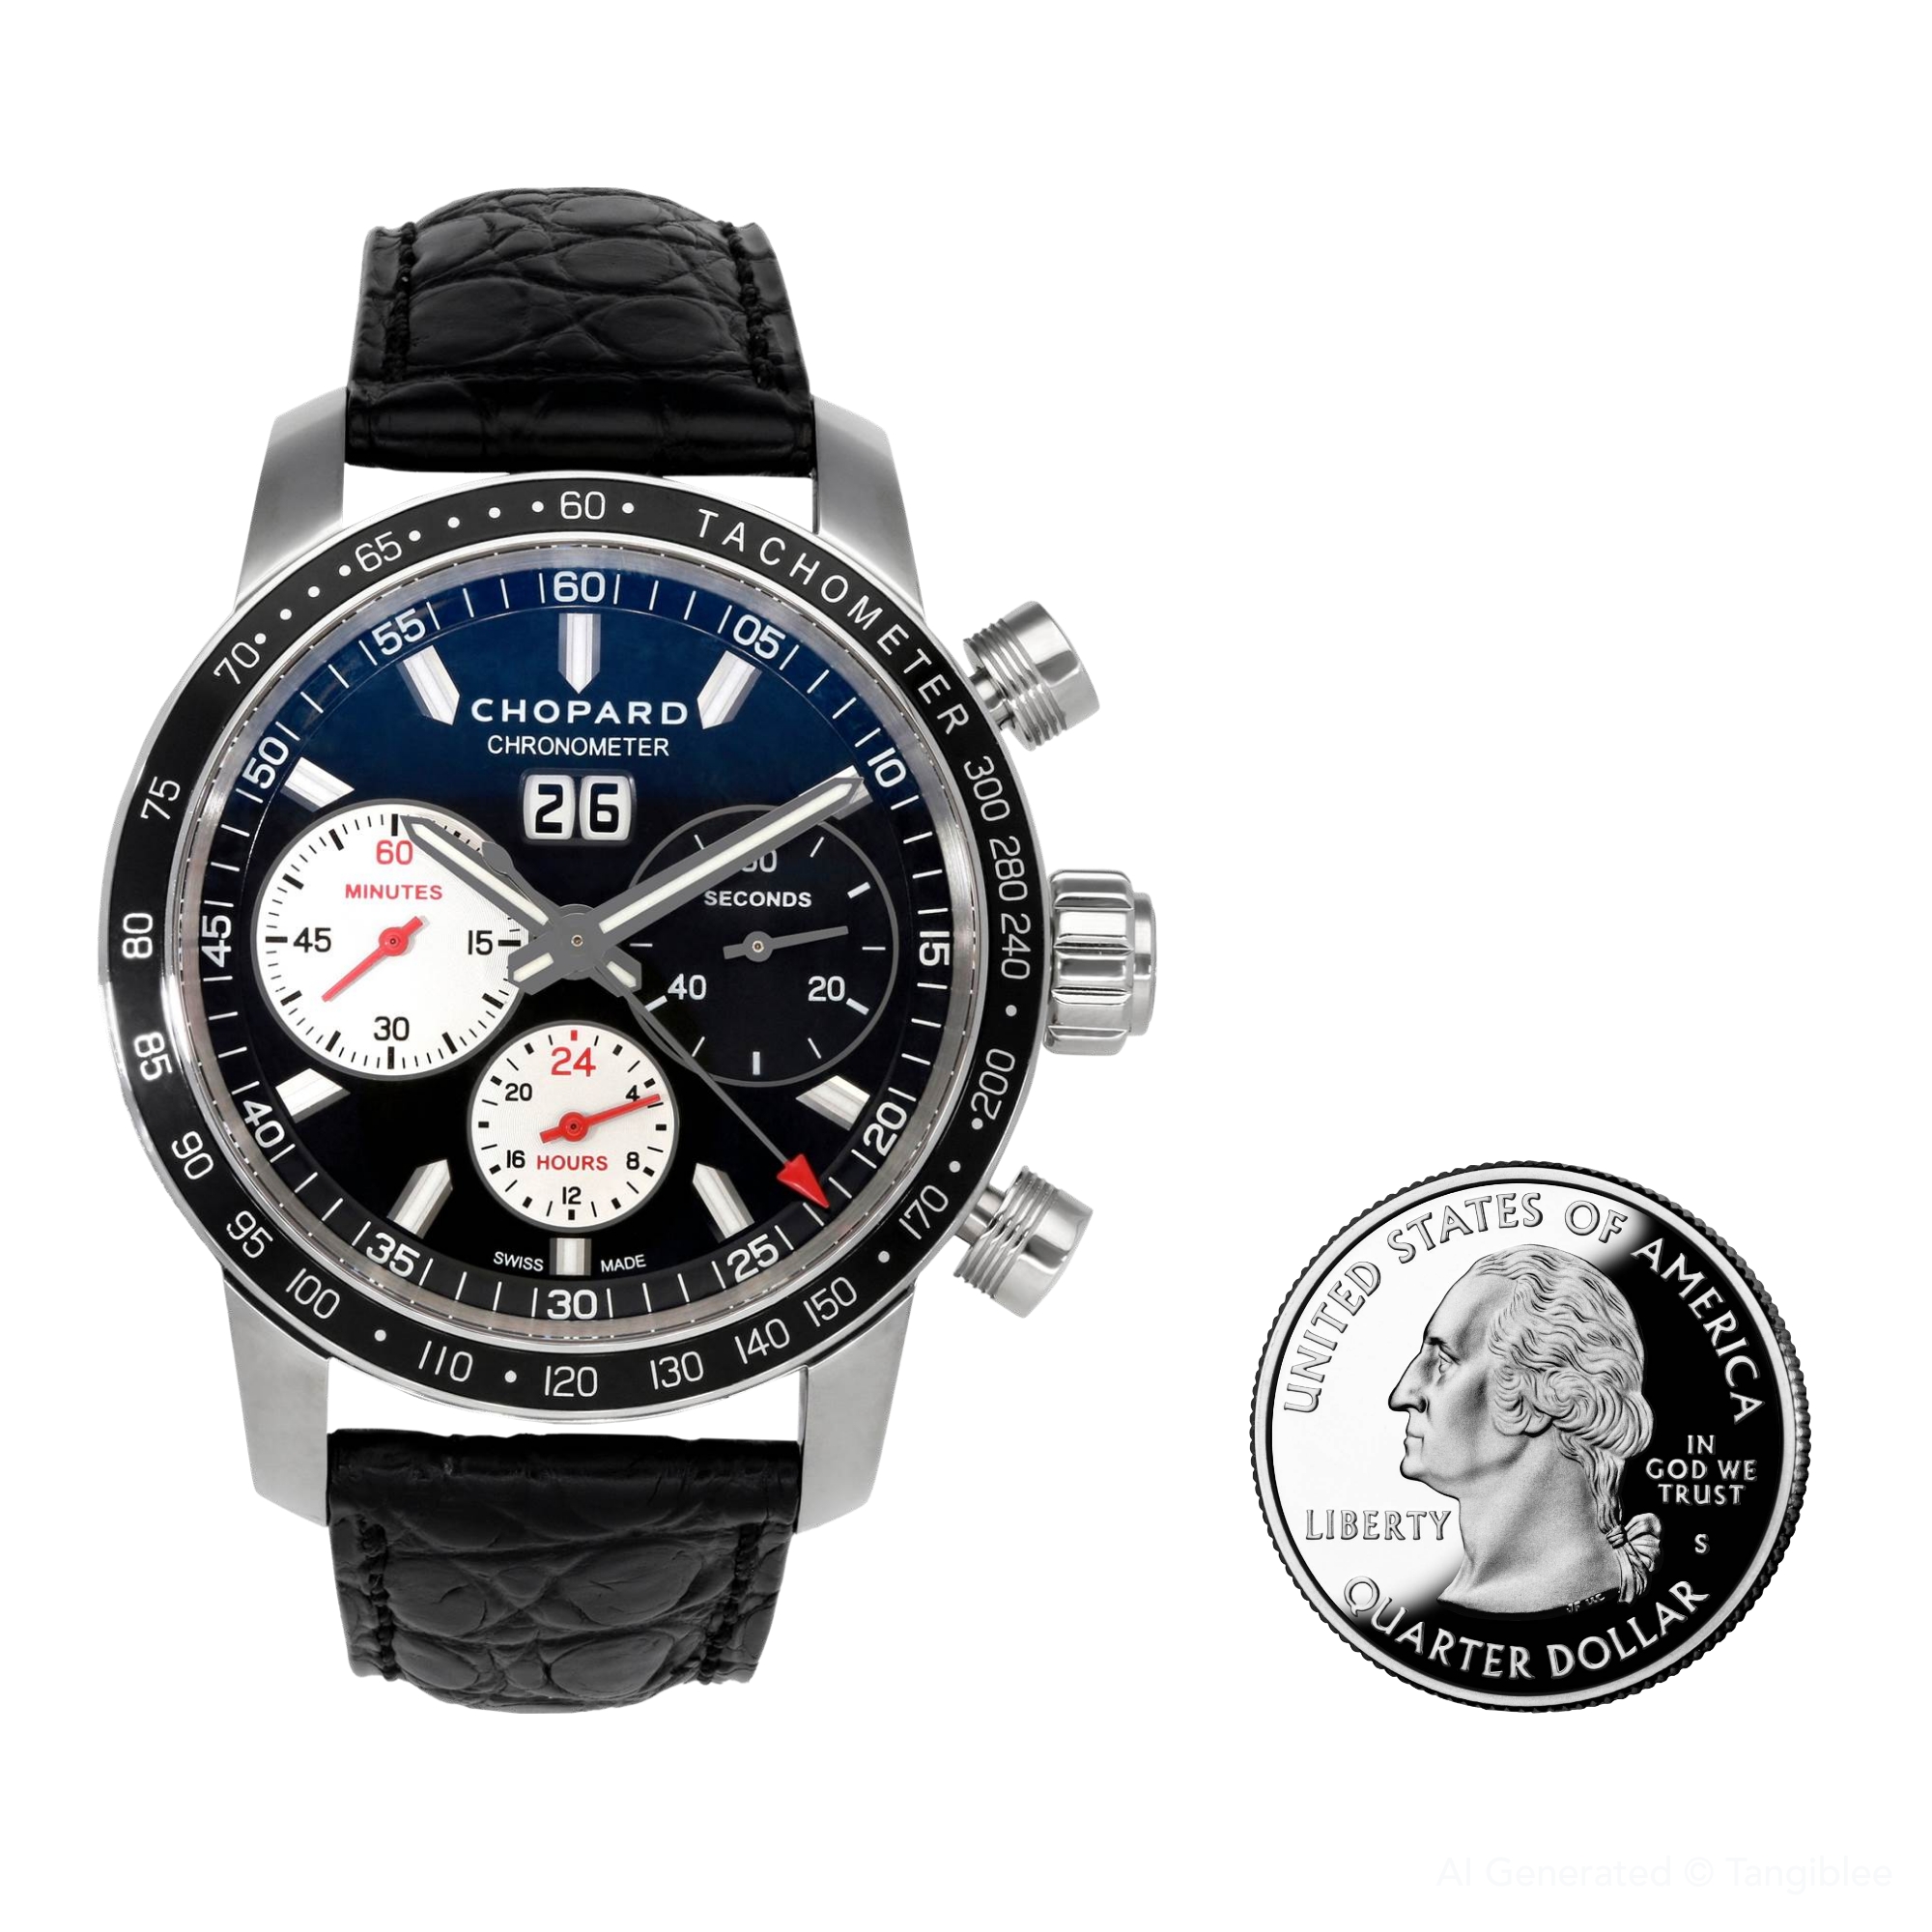 Chopard Mille Miglia Jacky Ickx Edition V Chronograph Automatic 